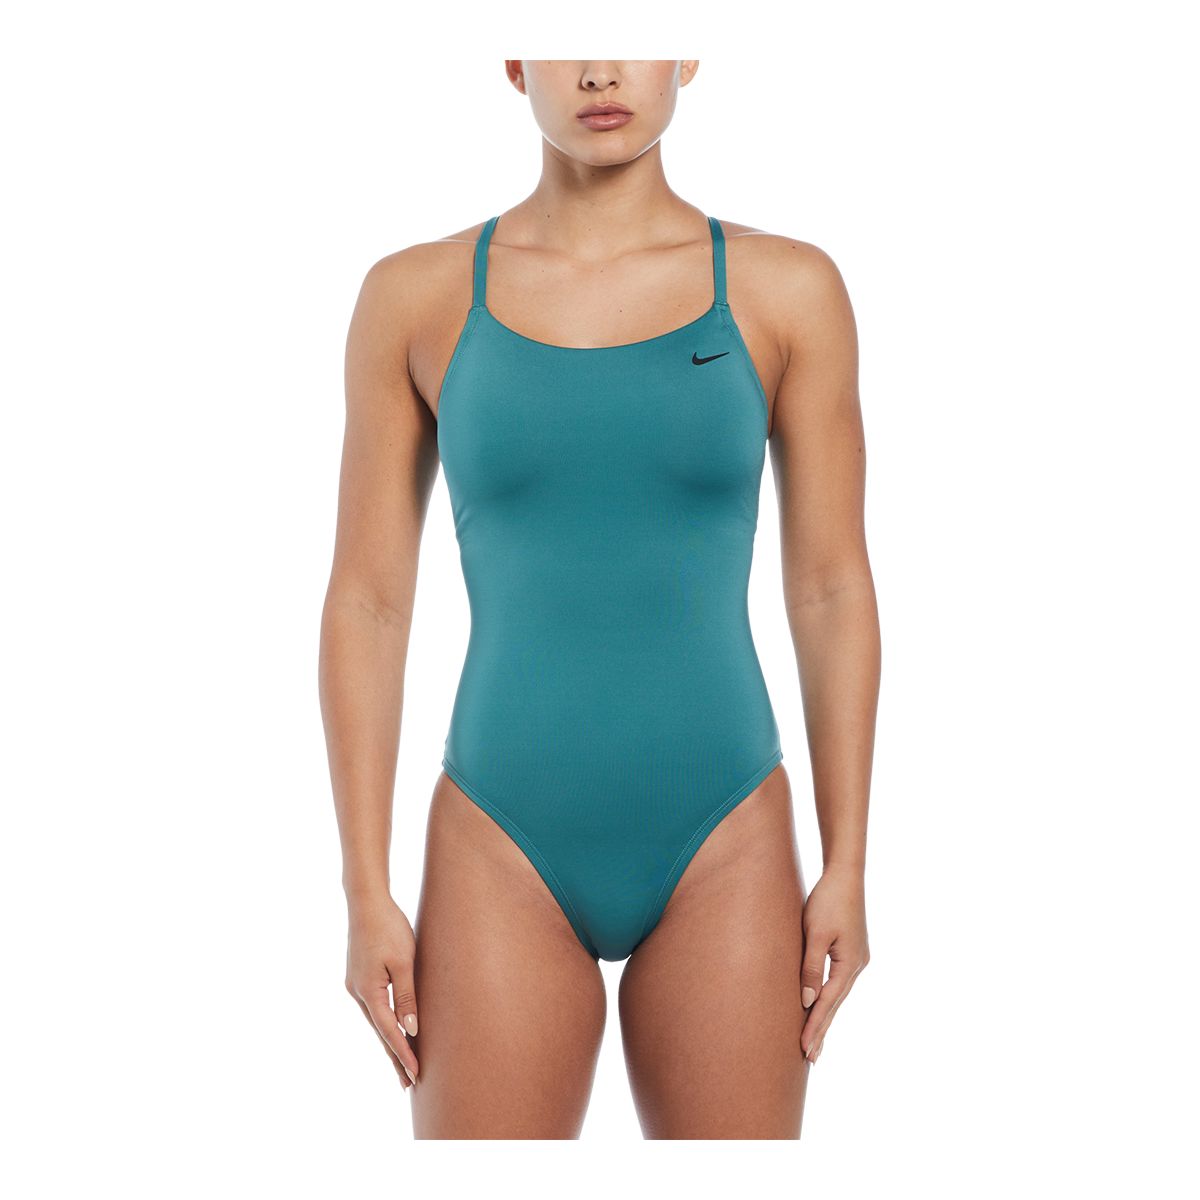 Image of Nike Women's Lace Up Back One Piece Swimsuit